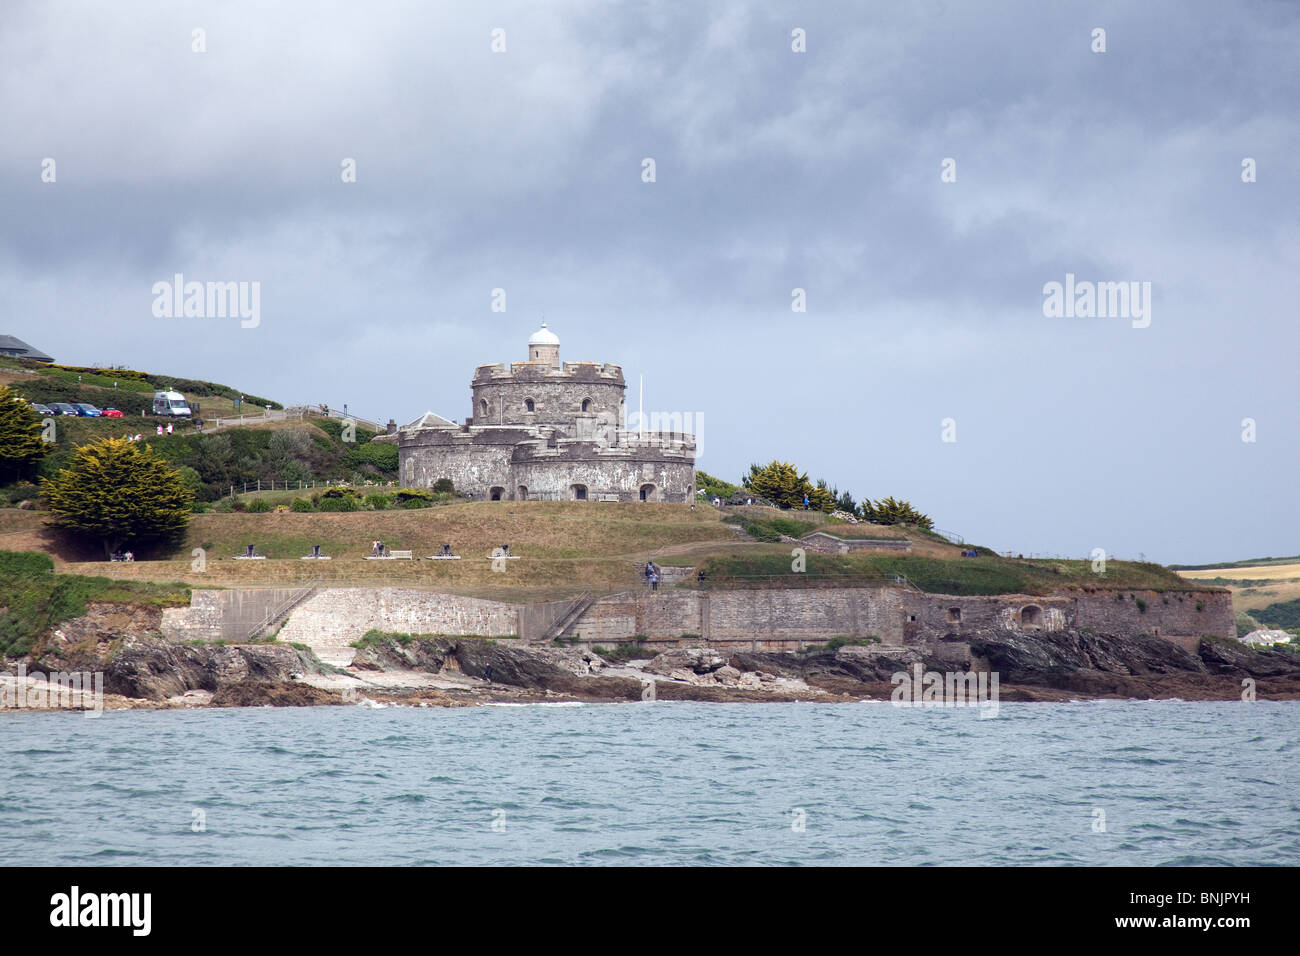 St Mawes castle, Cornwall, England. Stock Photo